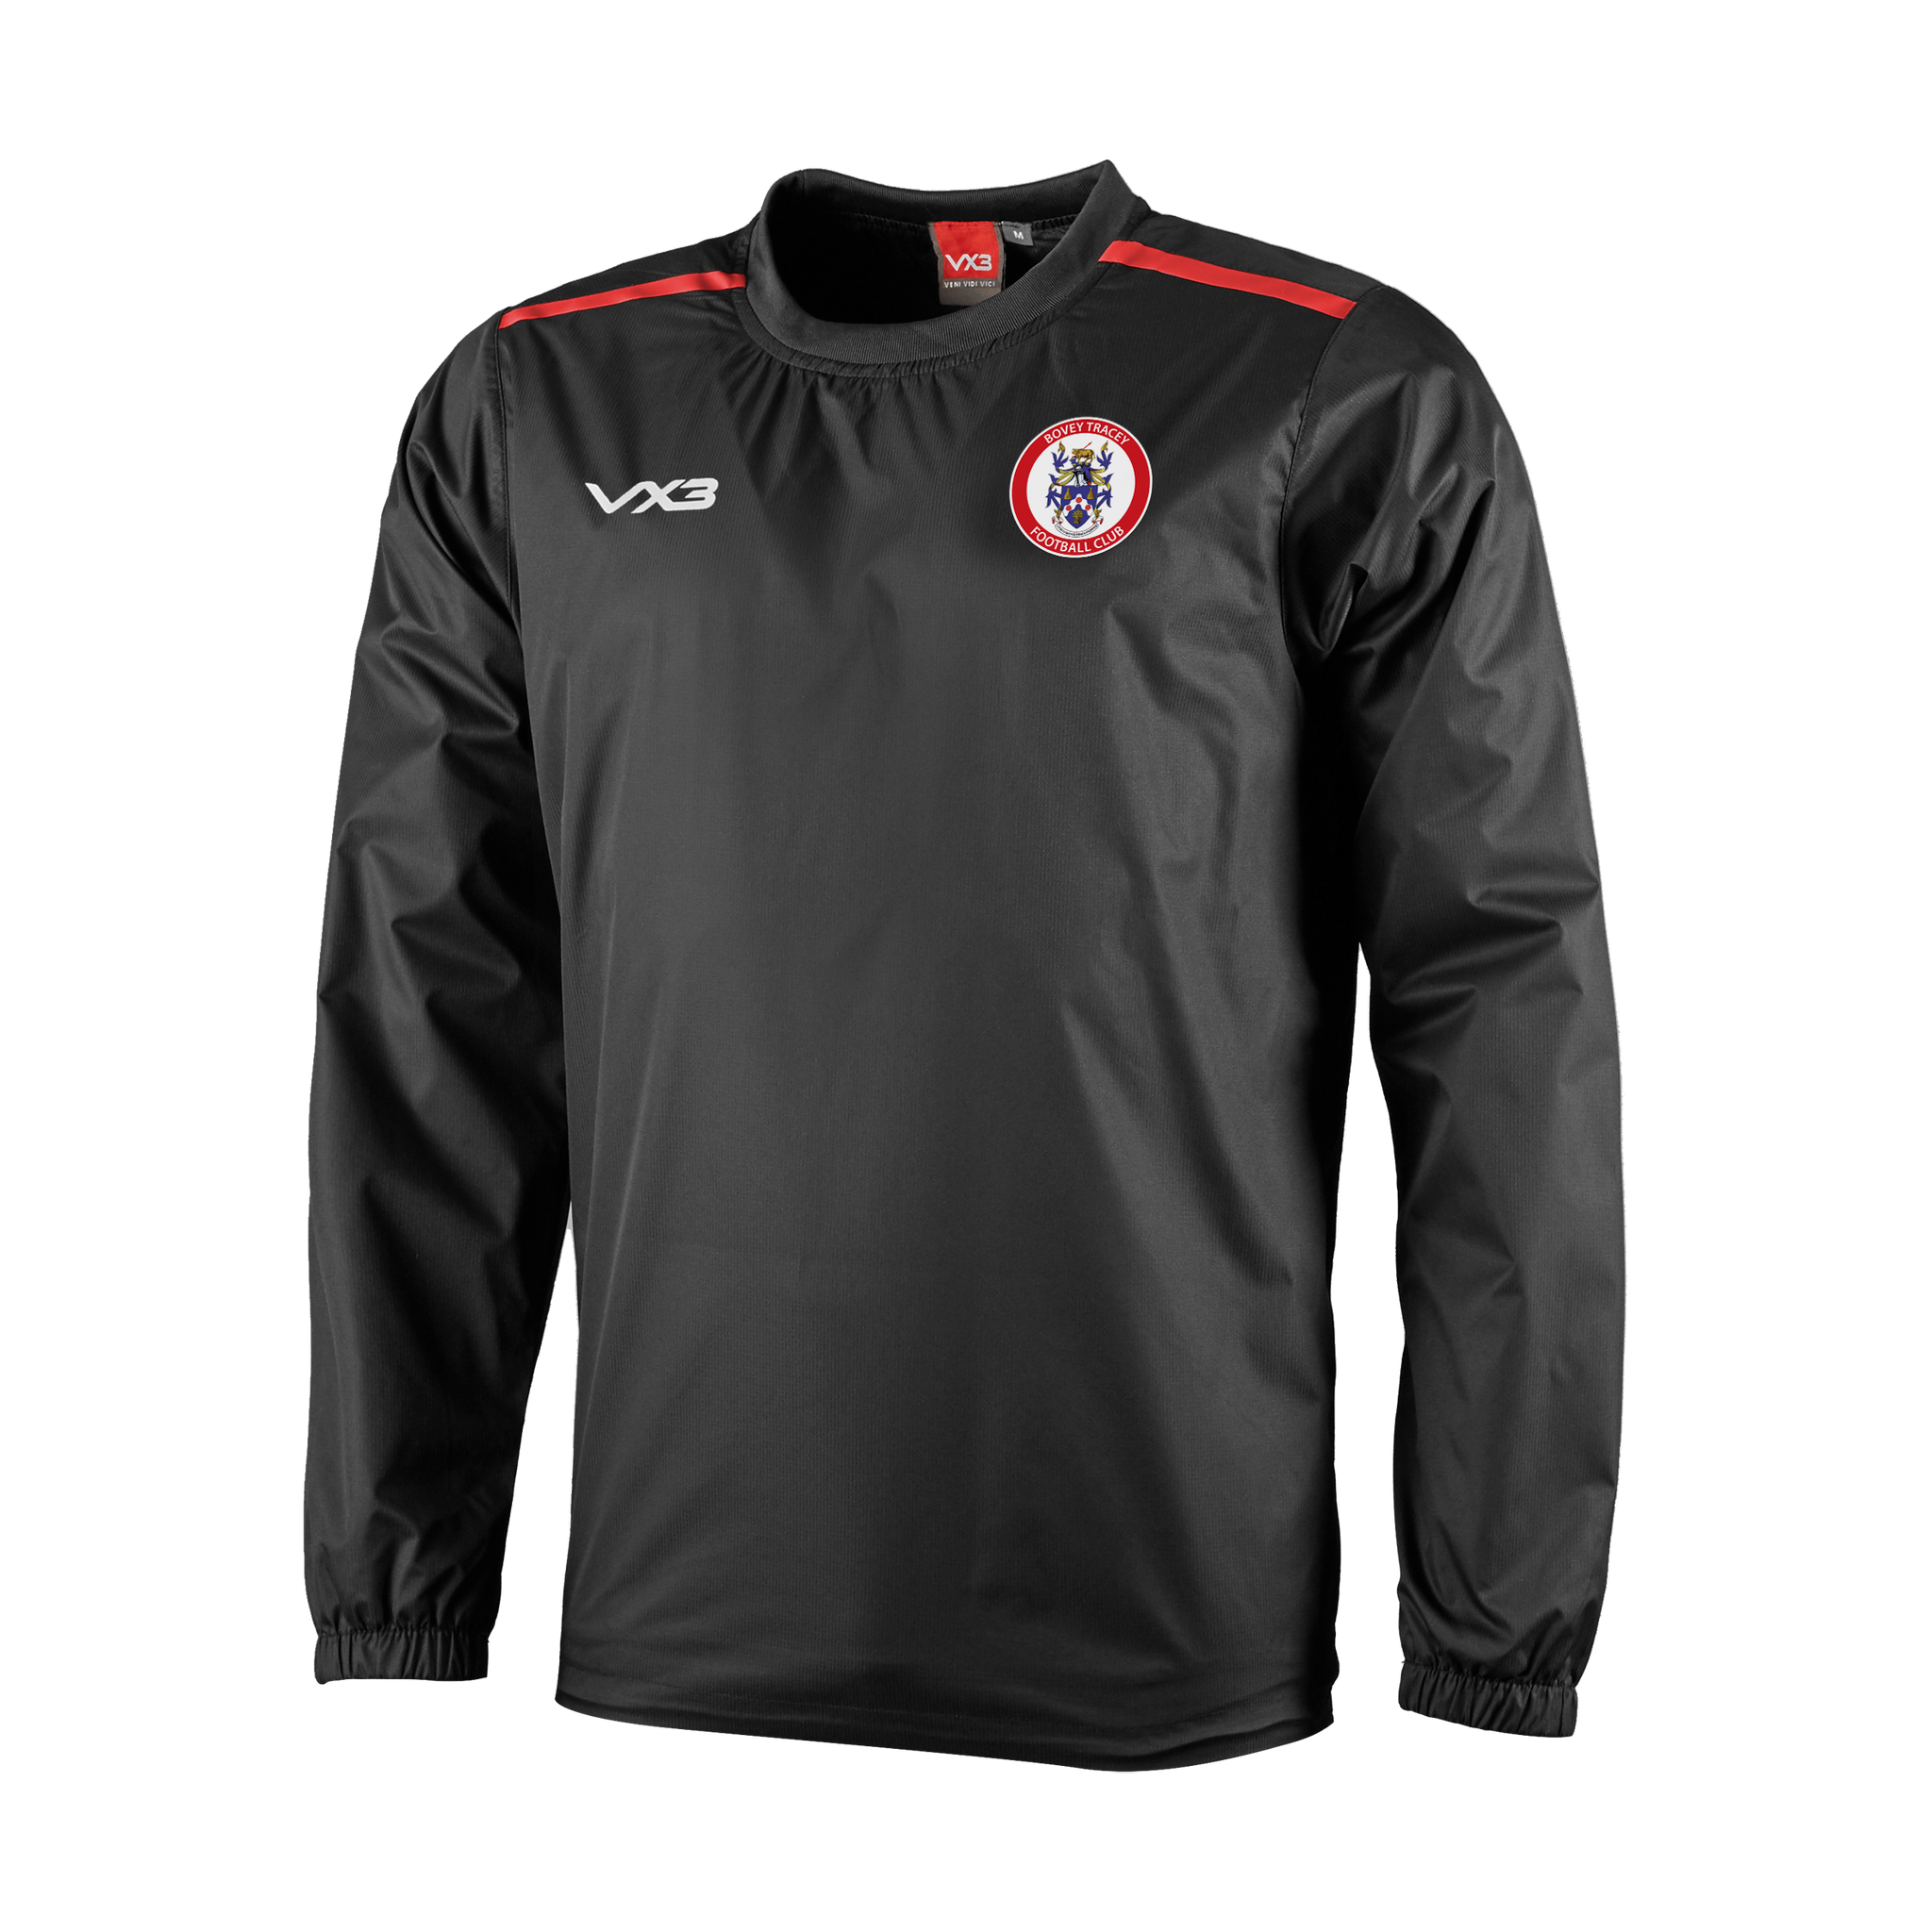 Bovey Tracey AFC Fortis Smock